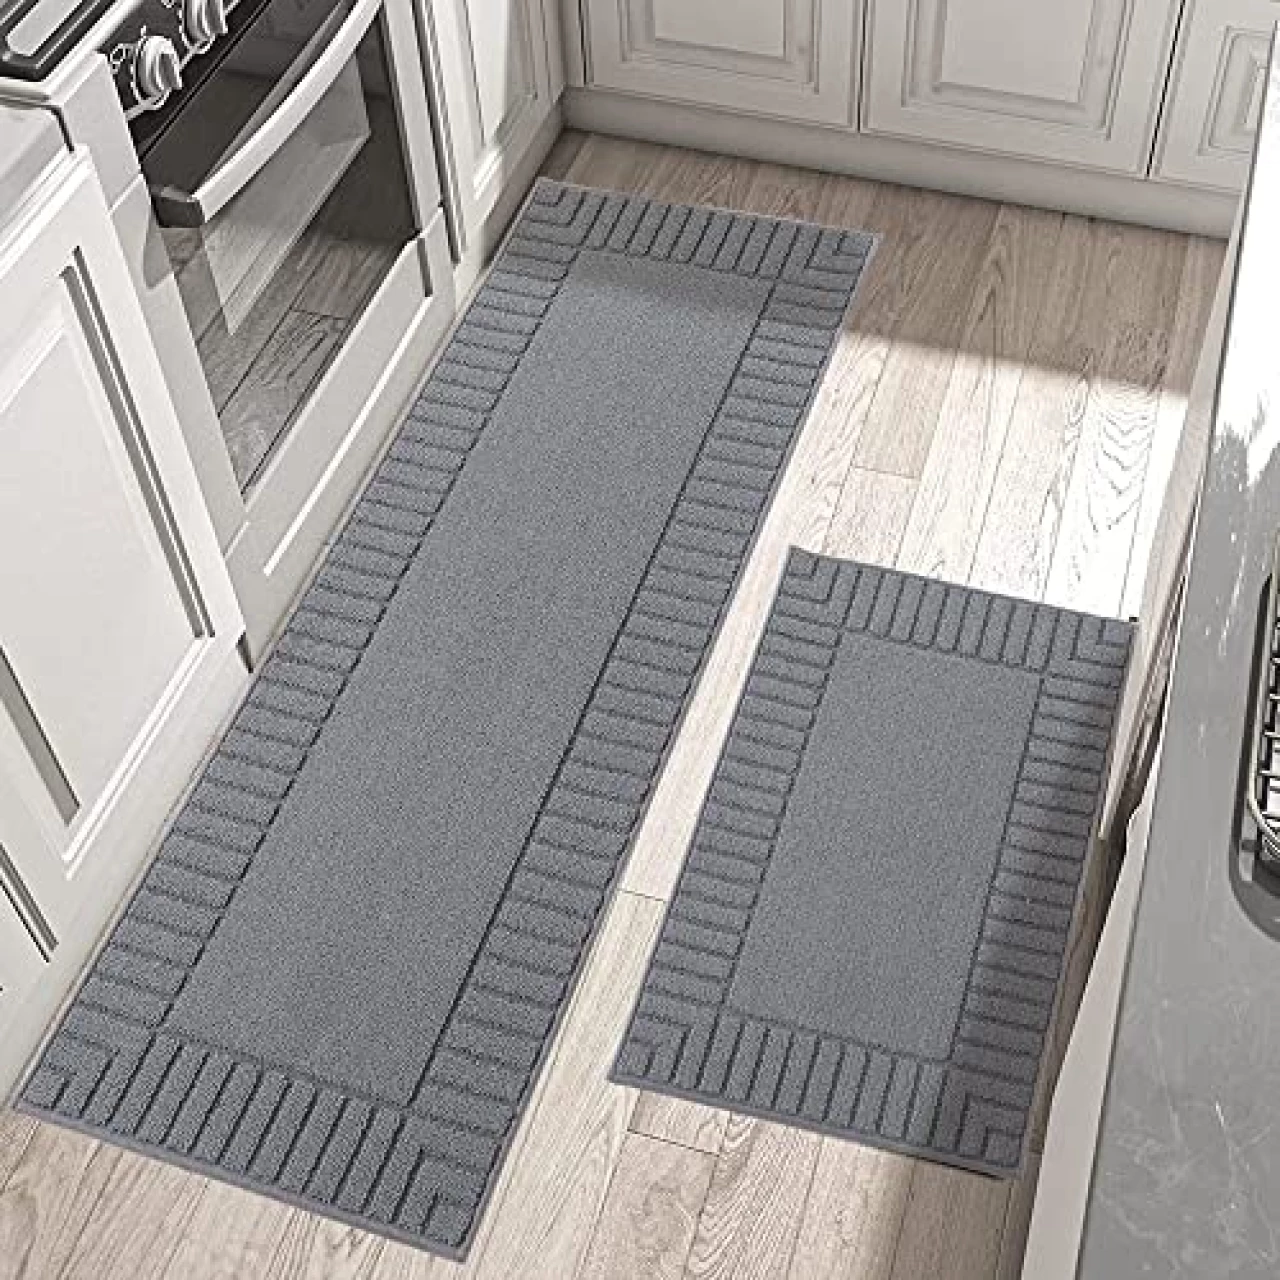 BEQHAUSE-Kitchen-Rugs-Washable-Kitchen-Mats-for-Floor Non-Slip Kitchen Mat Set of 2 Absorbent Kitchen Runner with TPR Non Skid Backing,Grey,24x35inch/24x60inch